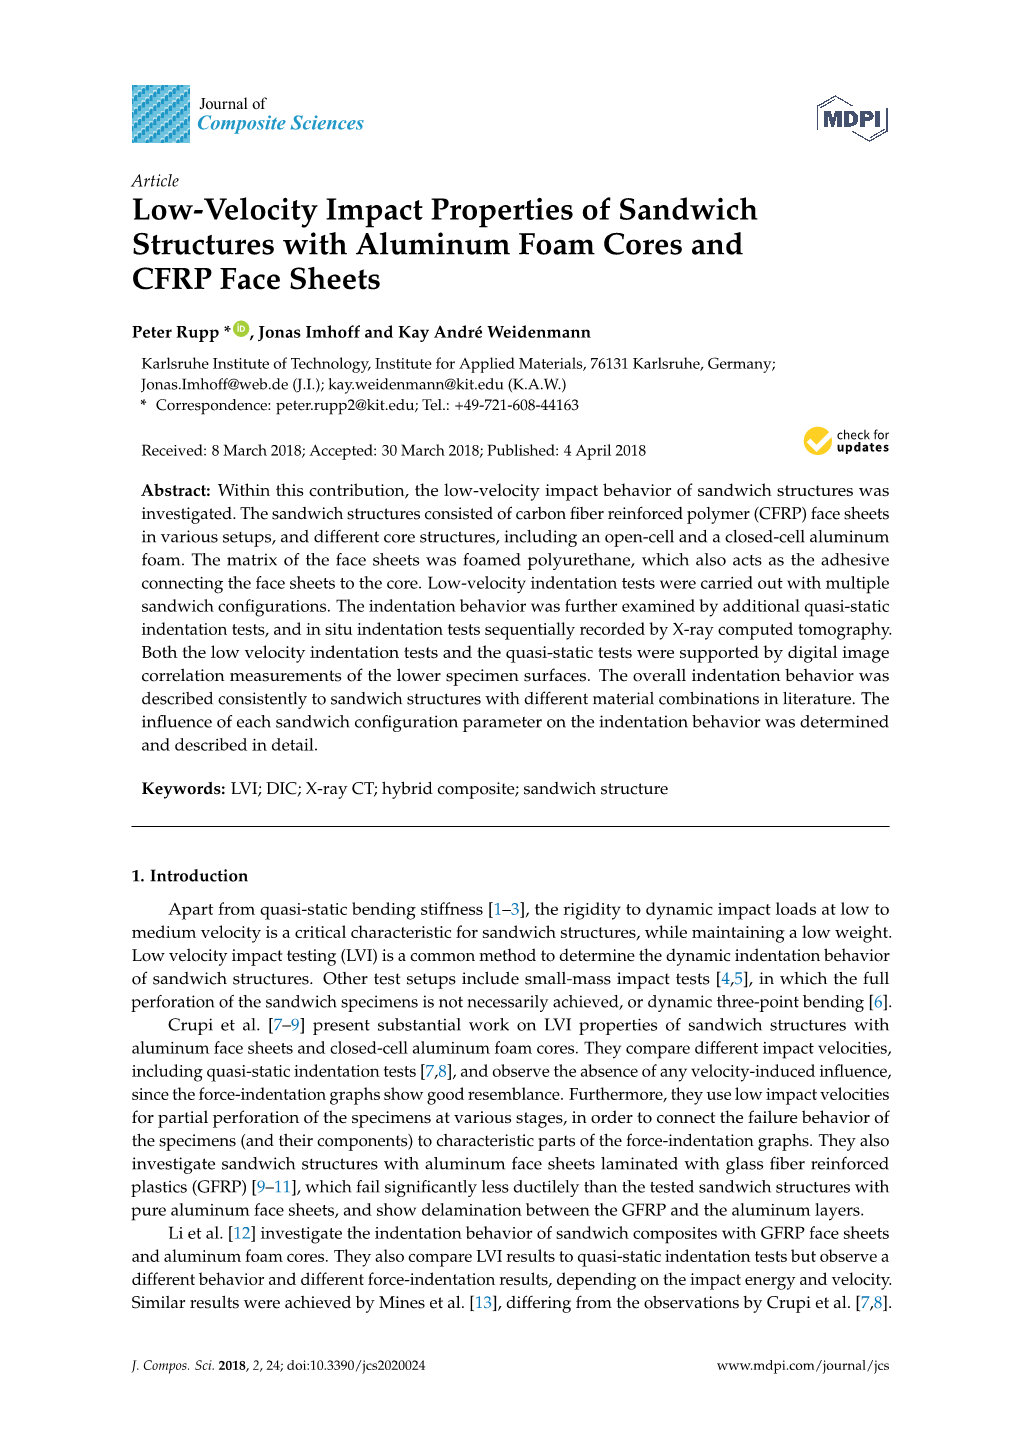 Low-Velocity Impact Properties of Sandwich Structures with Aluminum Foam Cores and CFRP Face Sheets